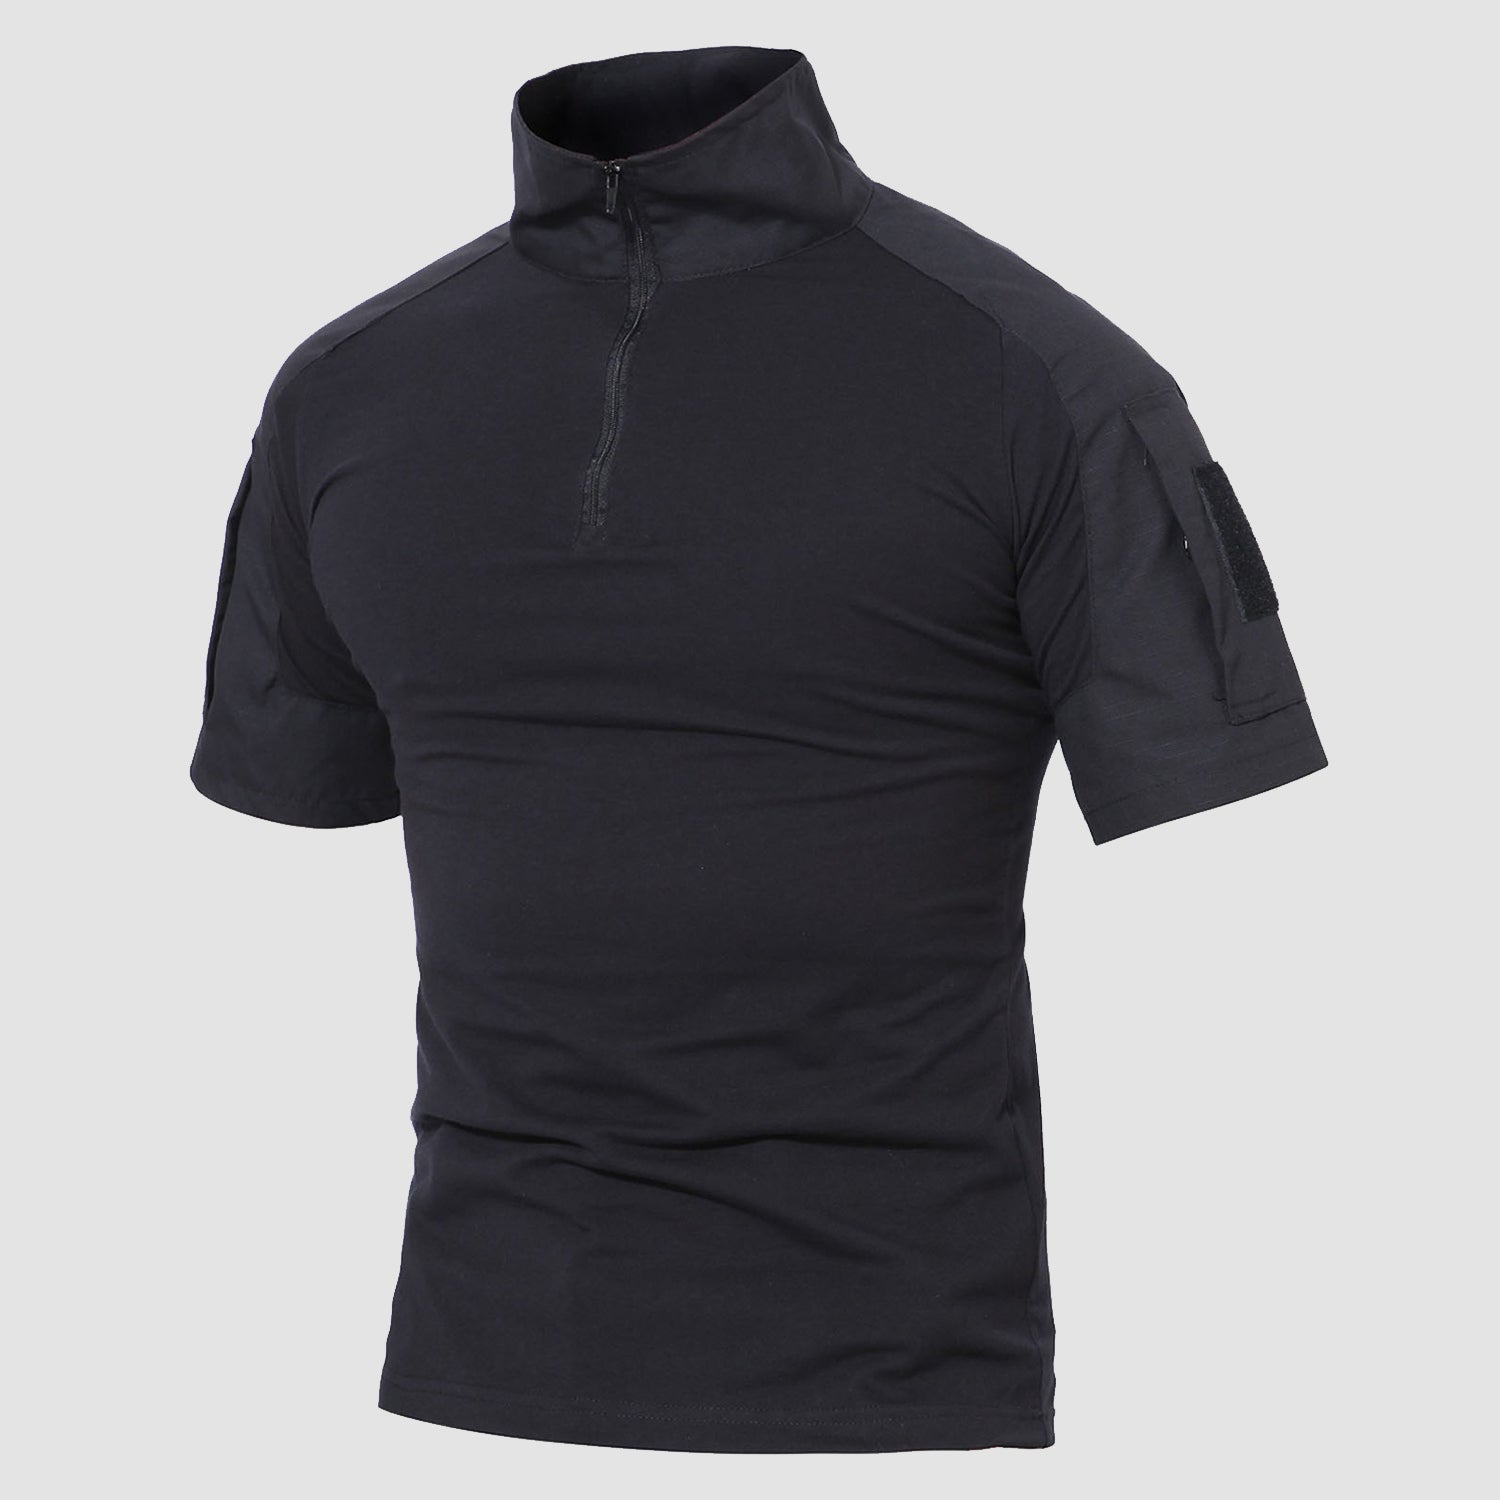 Men's Tactical | Tactical Clothing And Gear | MAGCOMSEN